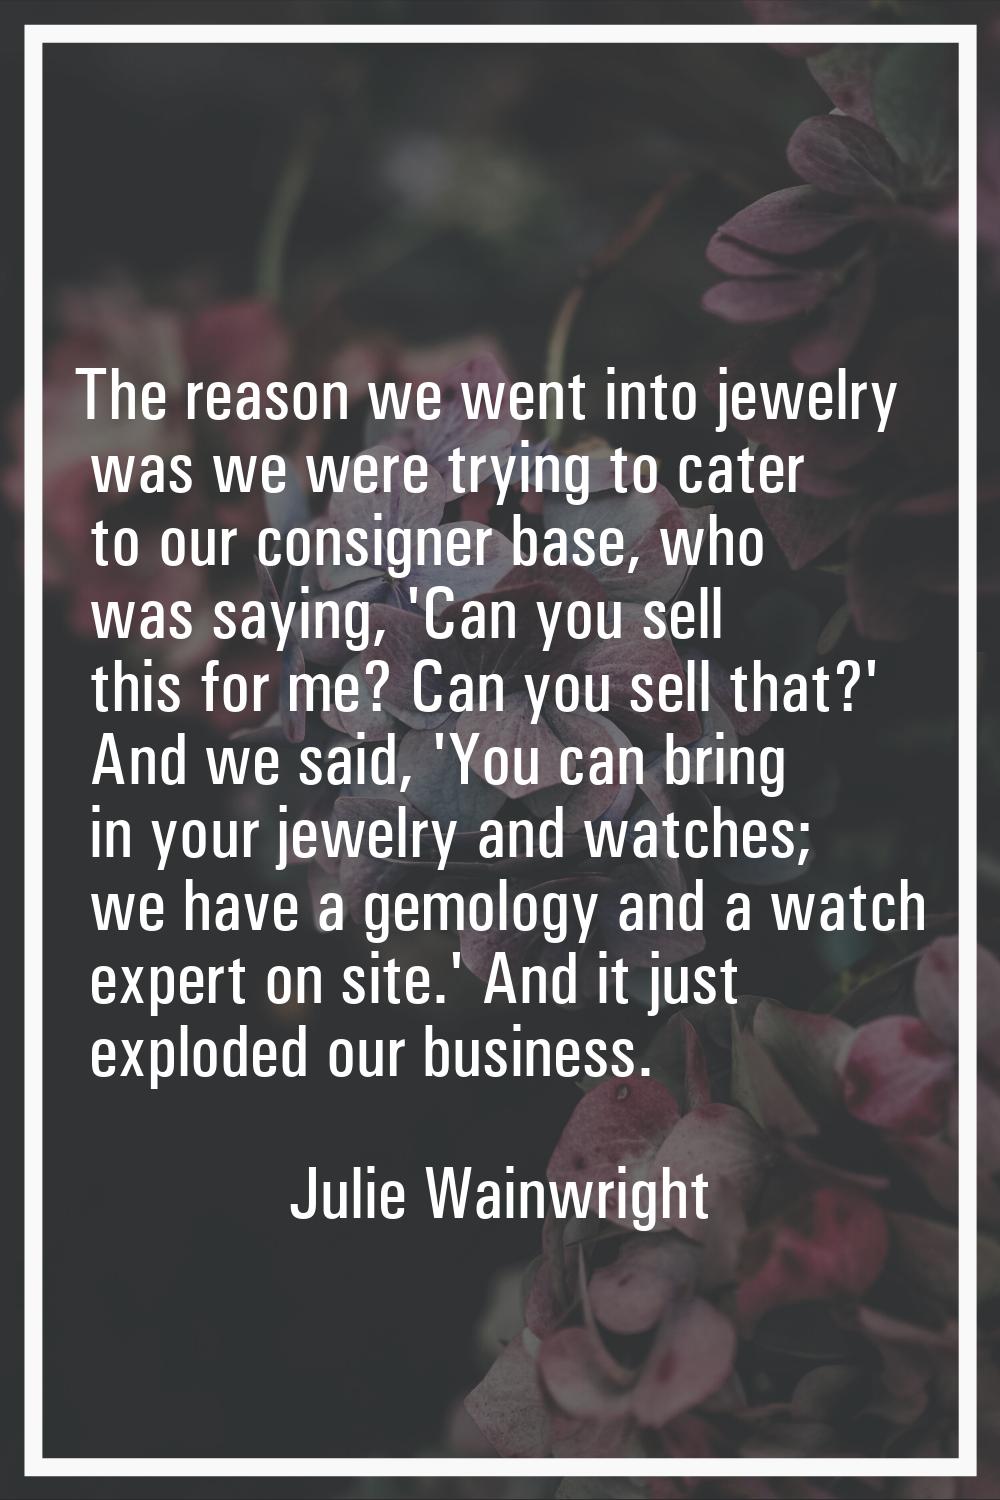 The reason we went into jewelry was we were trying to cater to our consigner base, who was saying, 